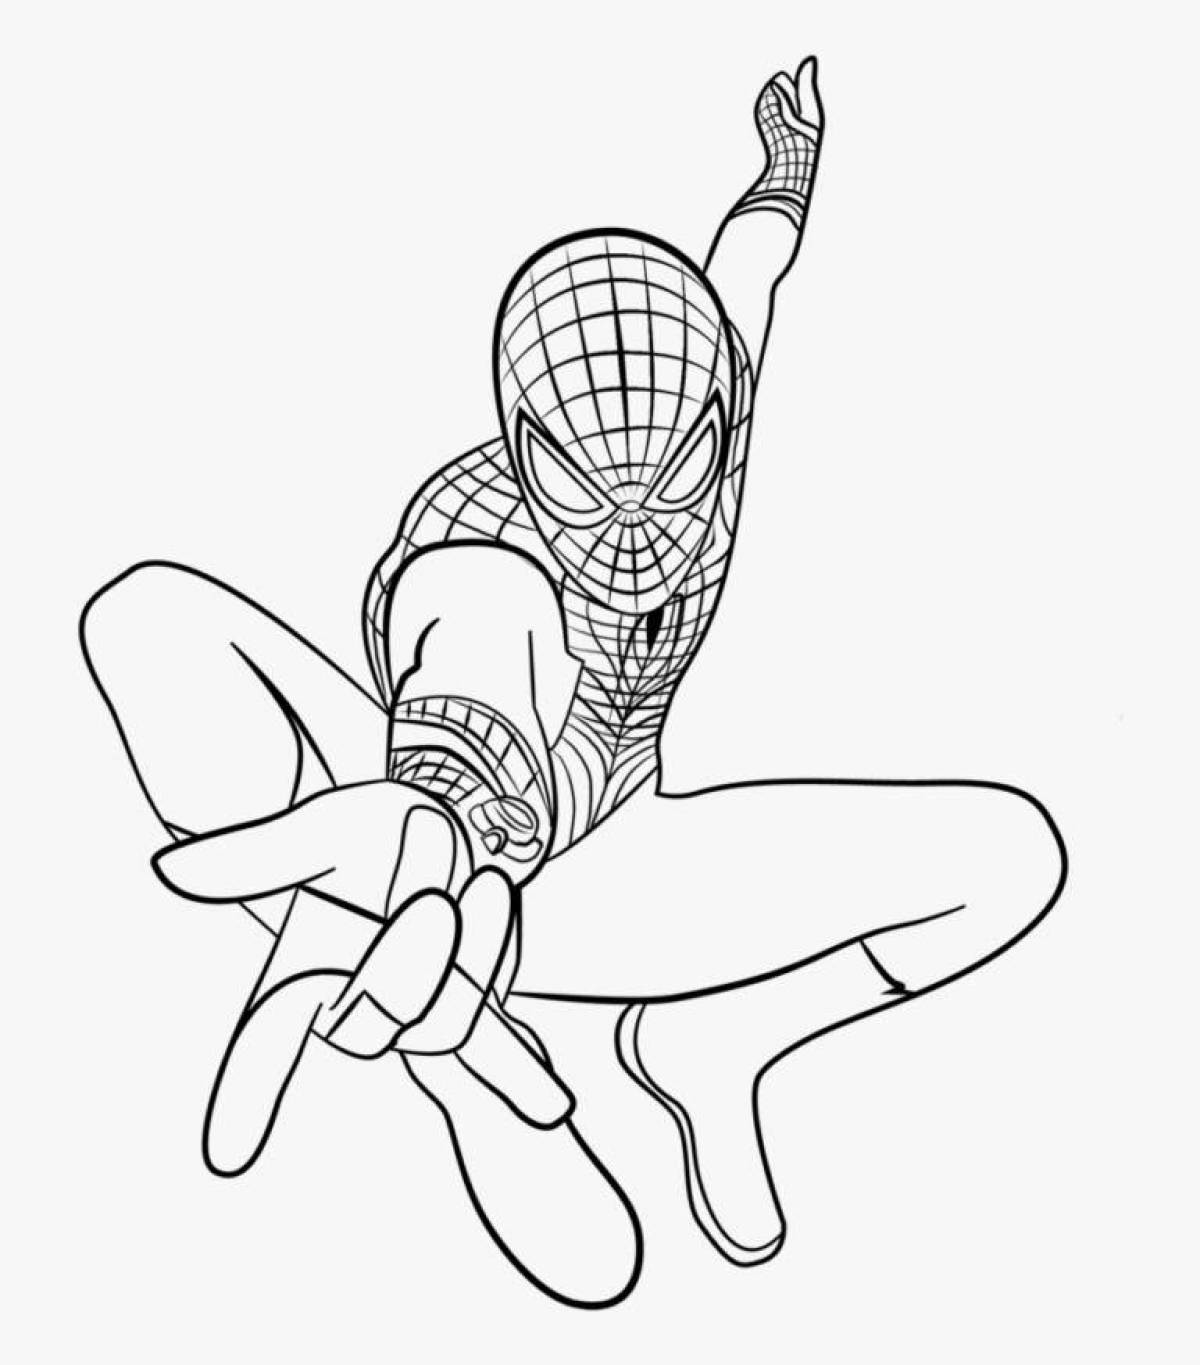 Complex drawing of spider man